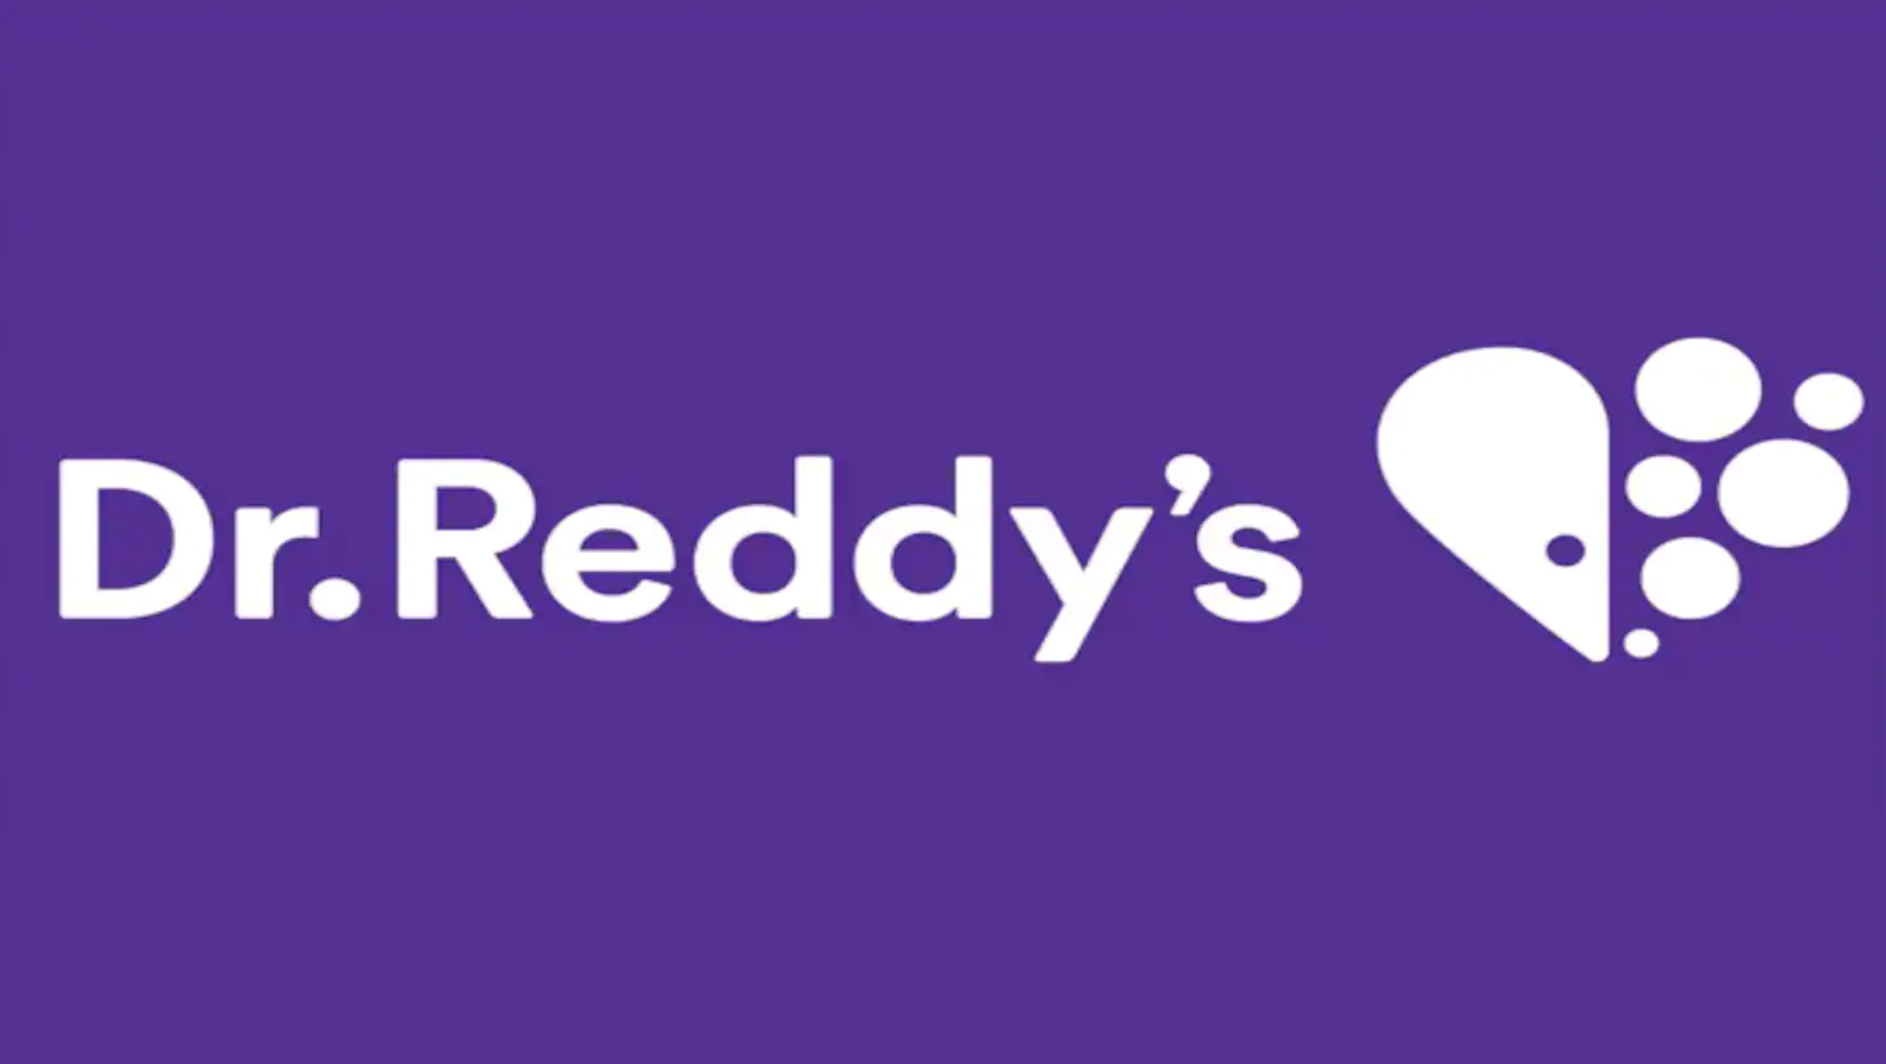 Dr. Reddy's Laboratories Announces Launch of Methylprednisolone Sodium Succinate for Injection, USP in U.S. Market